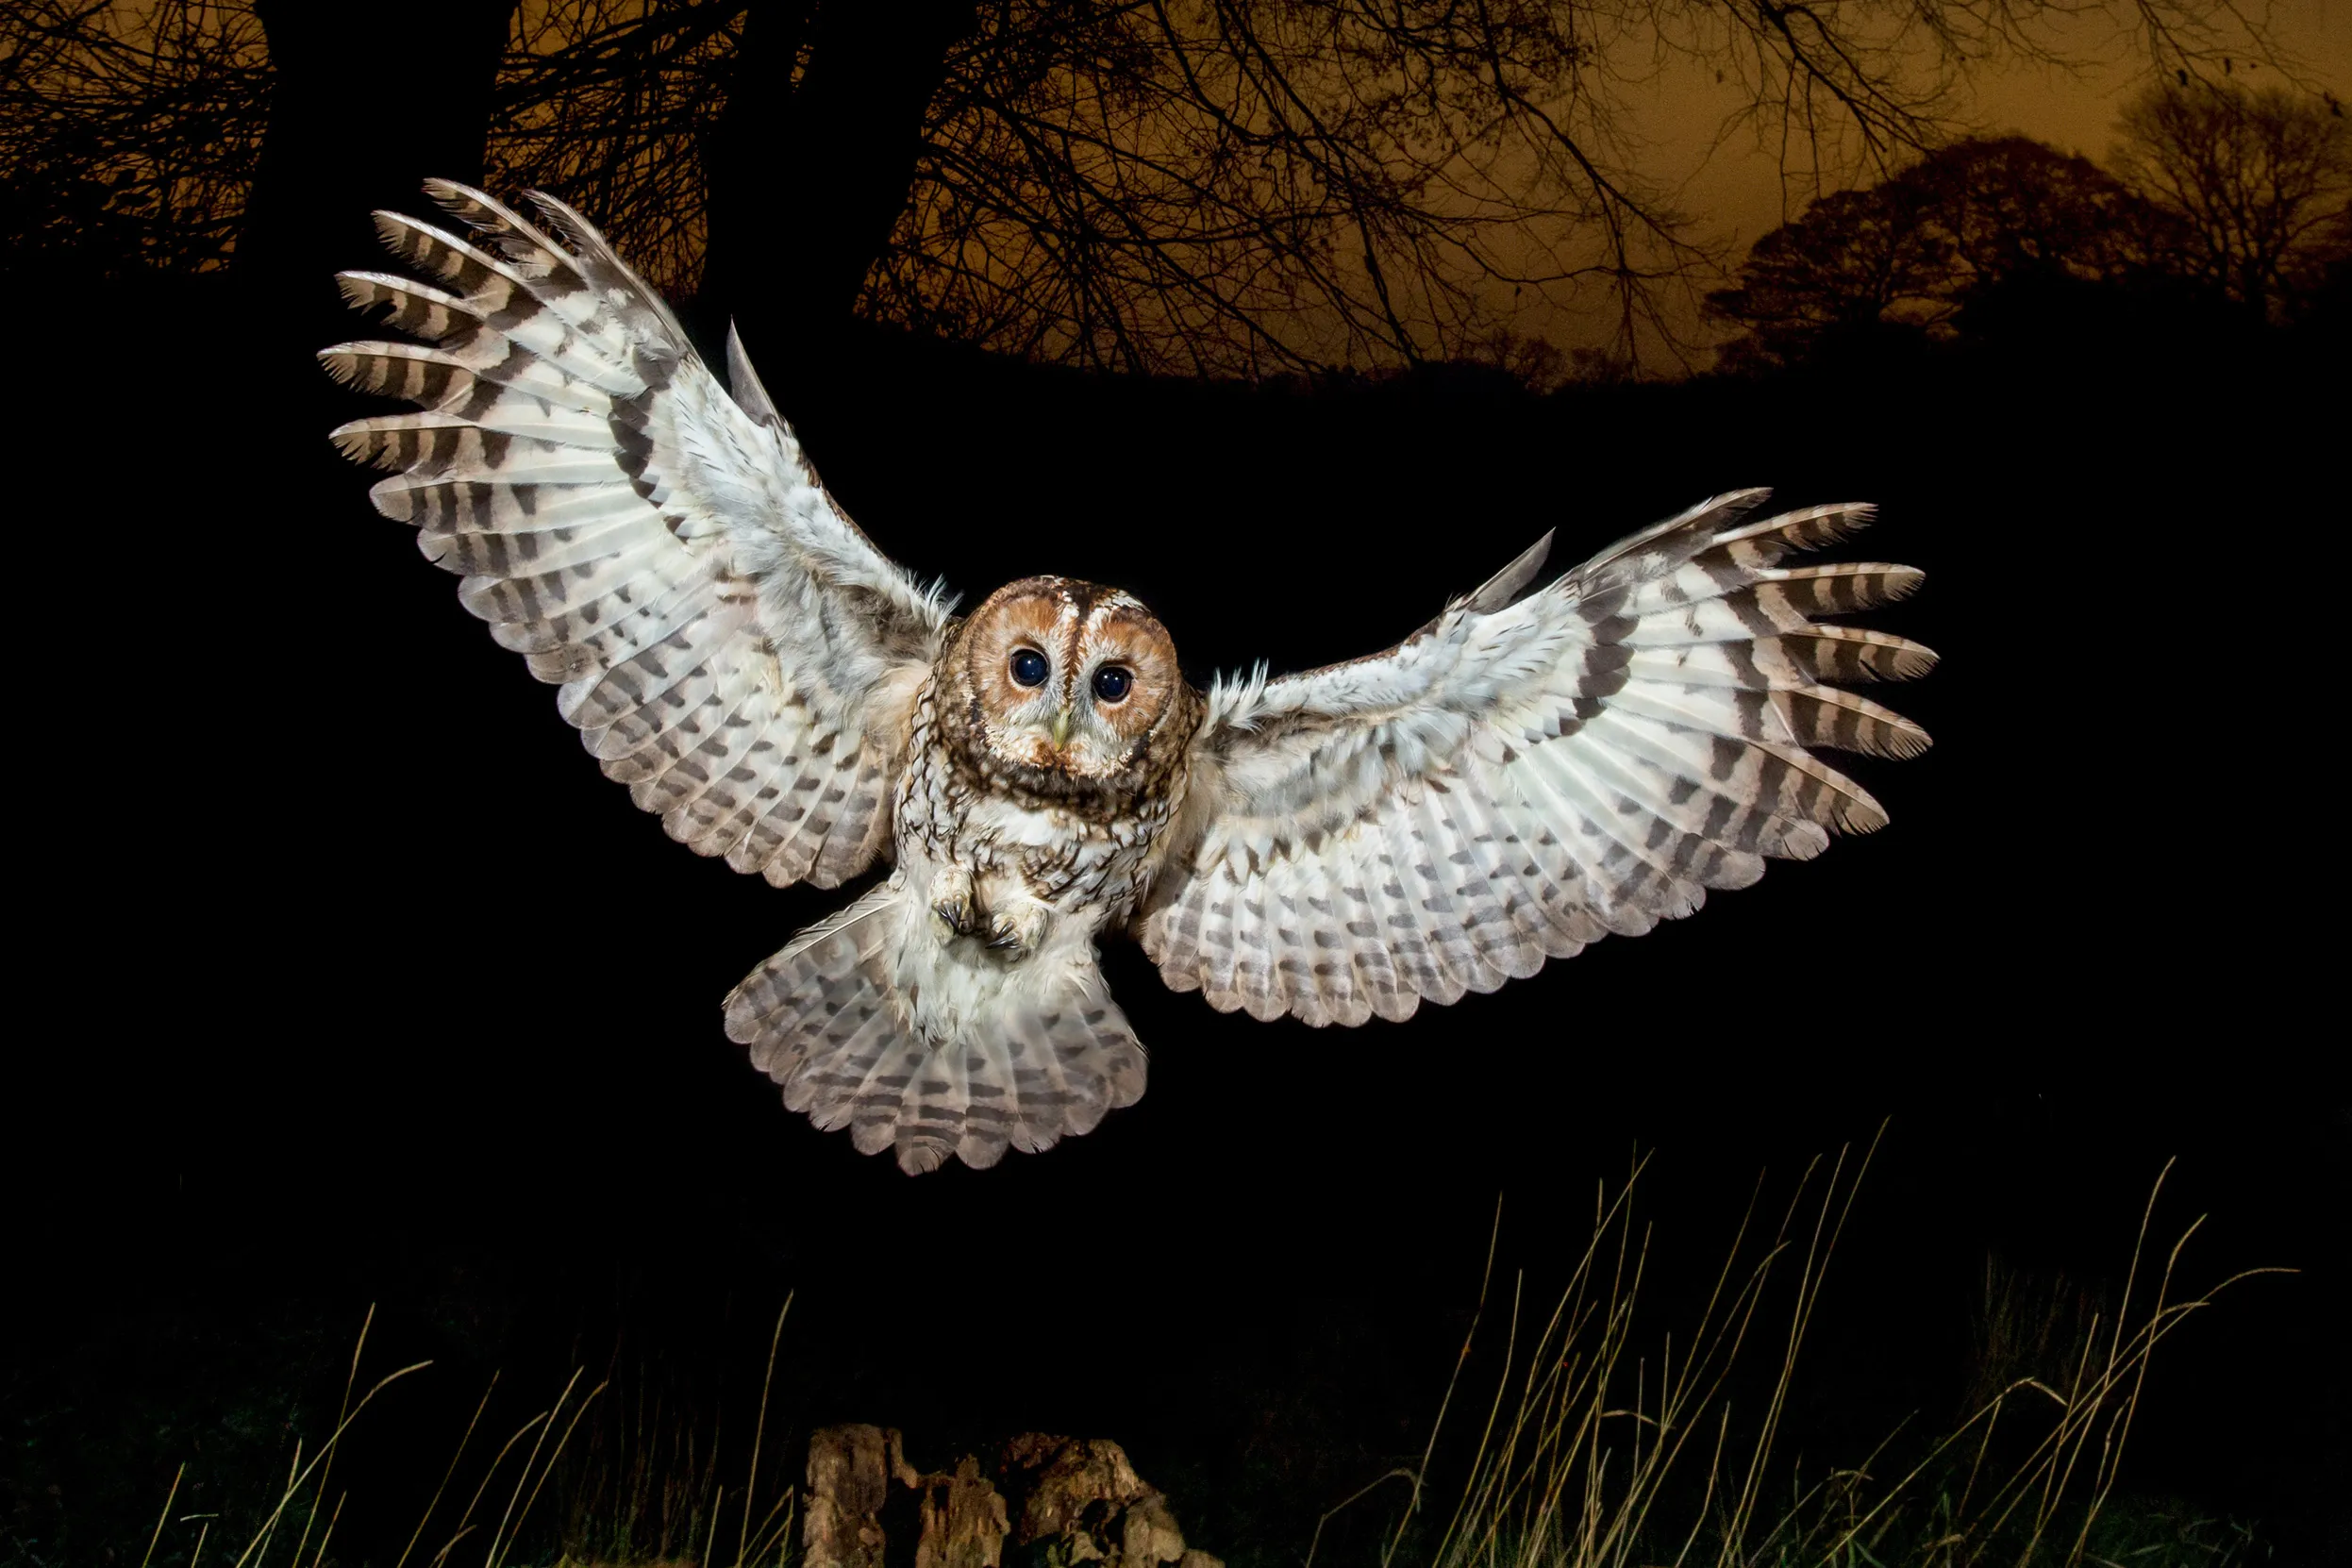 A lone Tawny Owl landing at night with wings spread out.